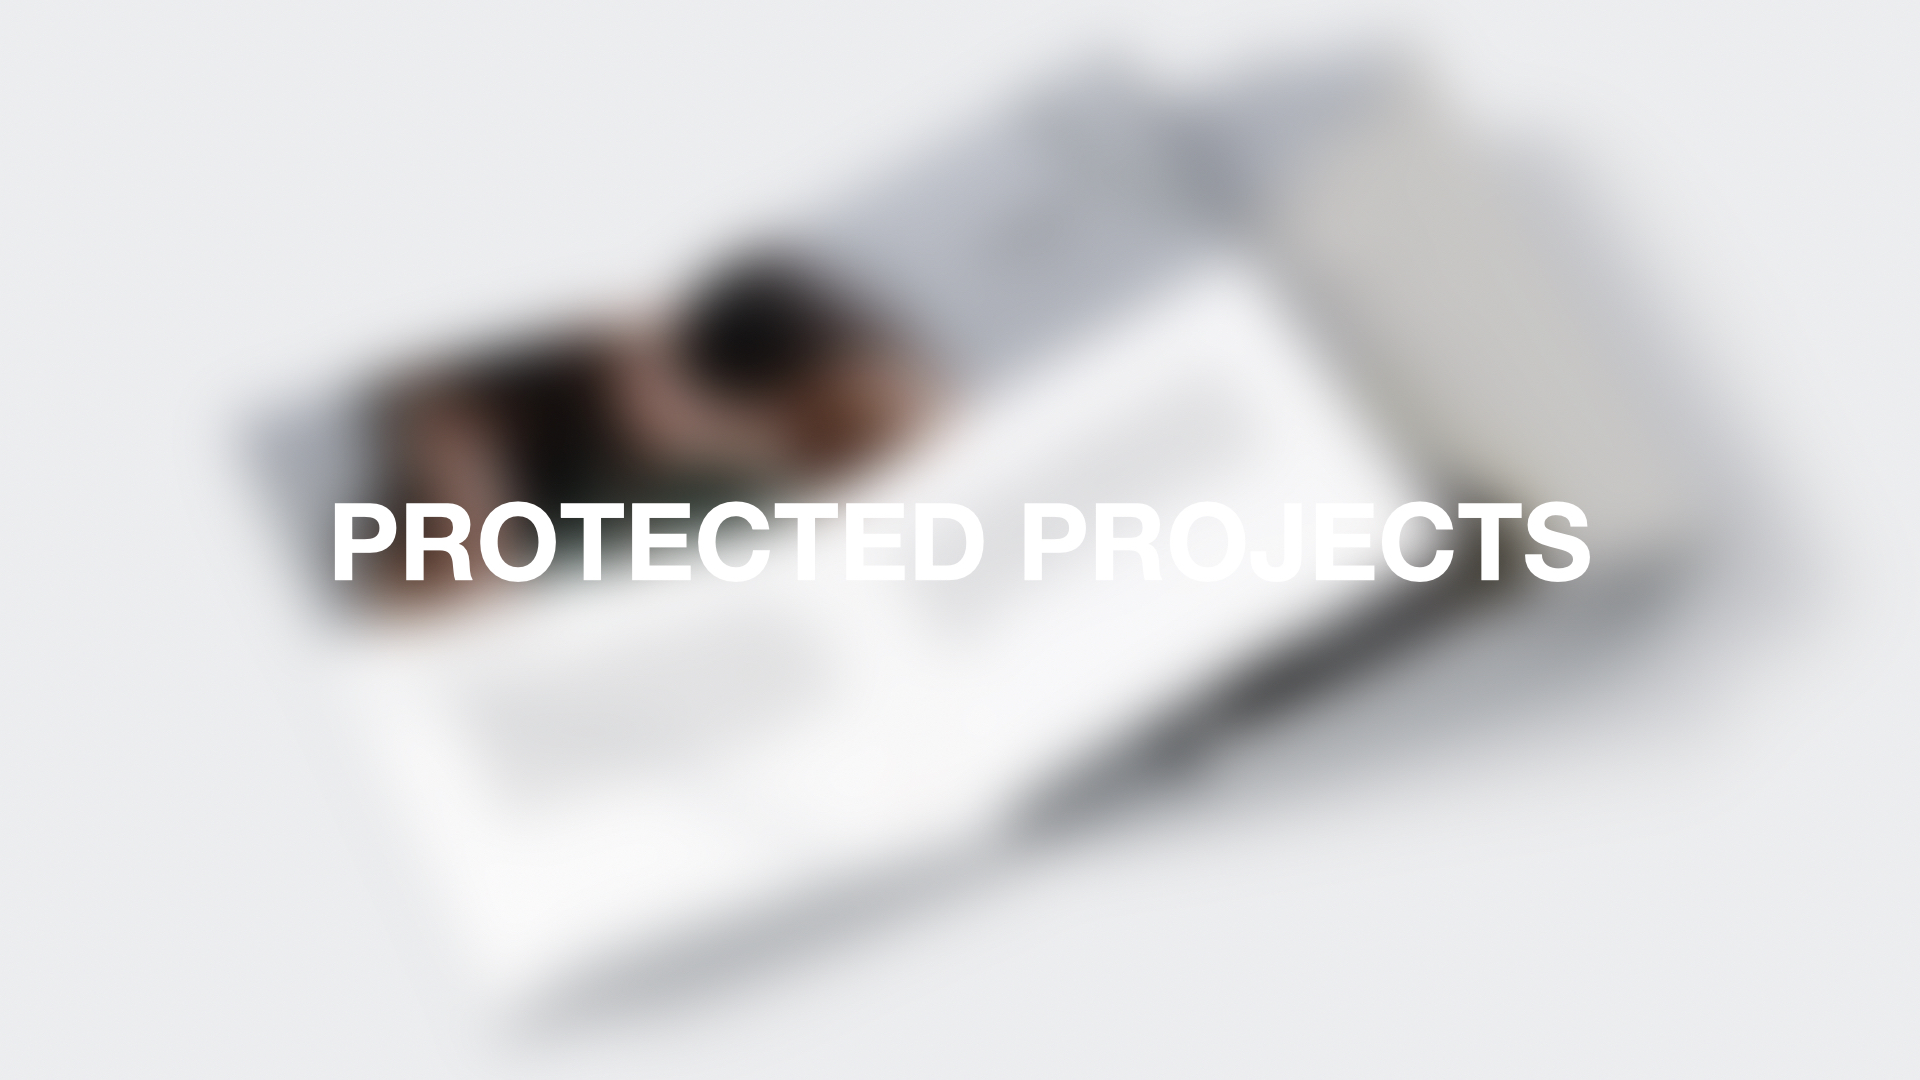 Protected: Projects